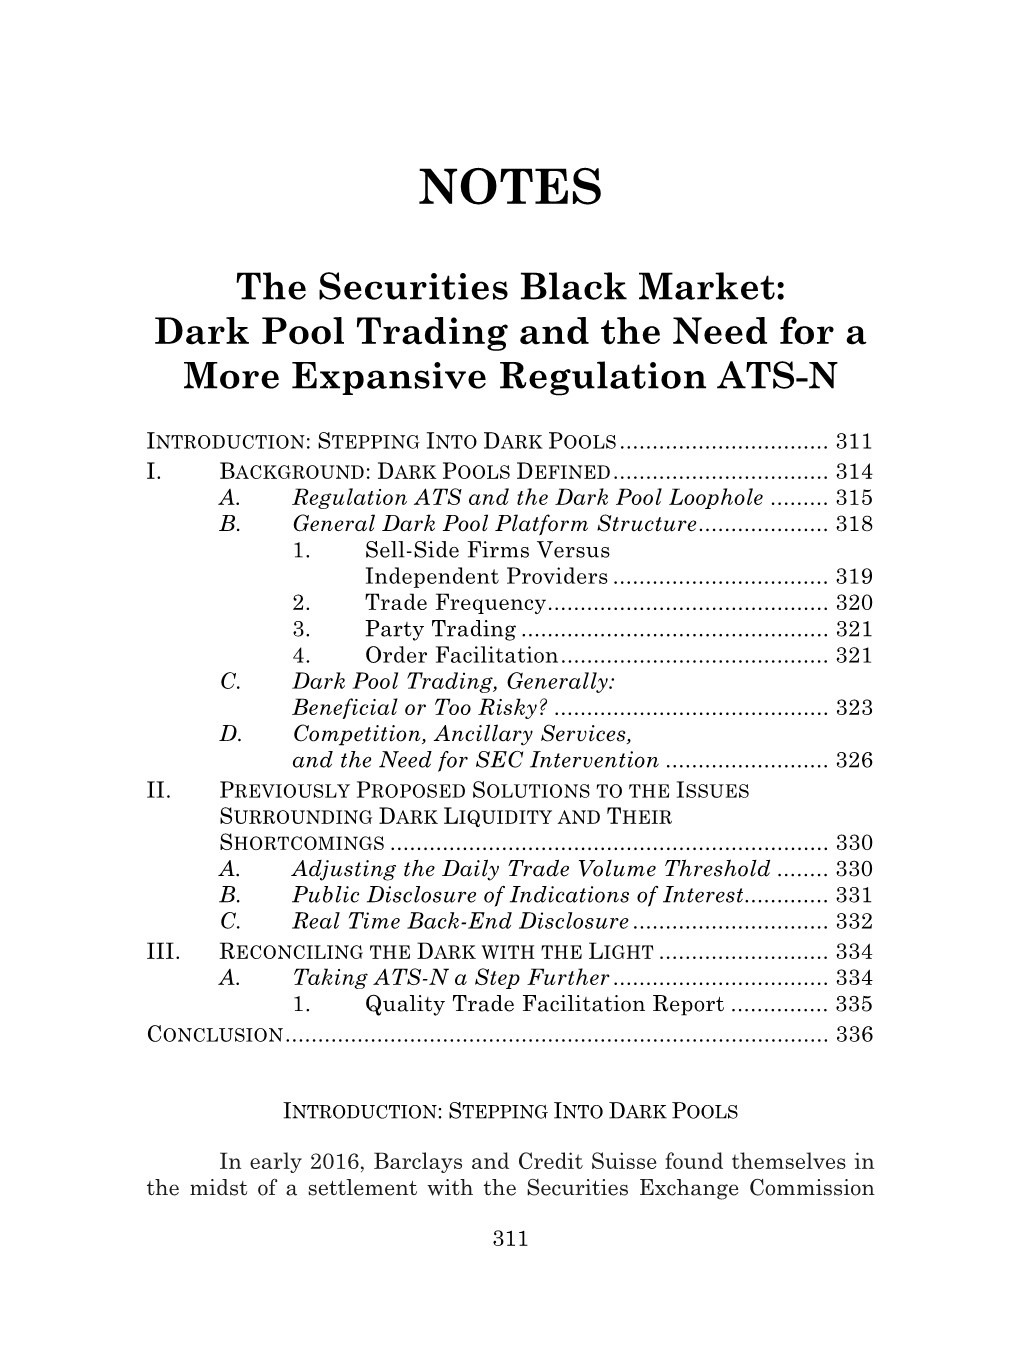 The Securities Black Market: Dark Pool Trading and the Need for a More Expansive Regulation ATS-N